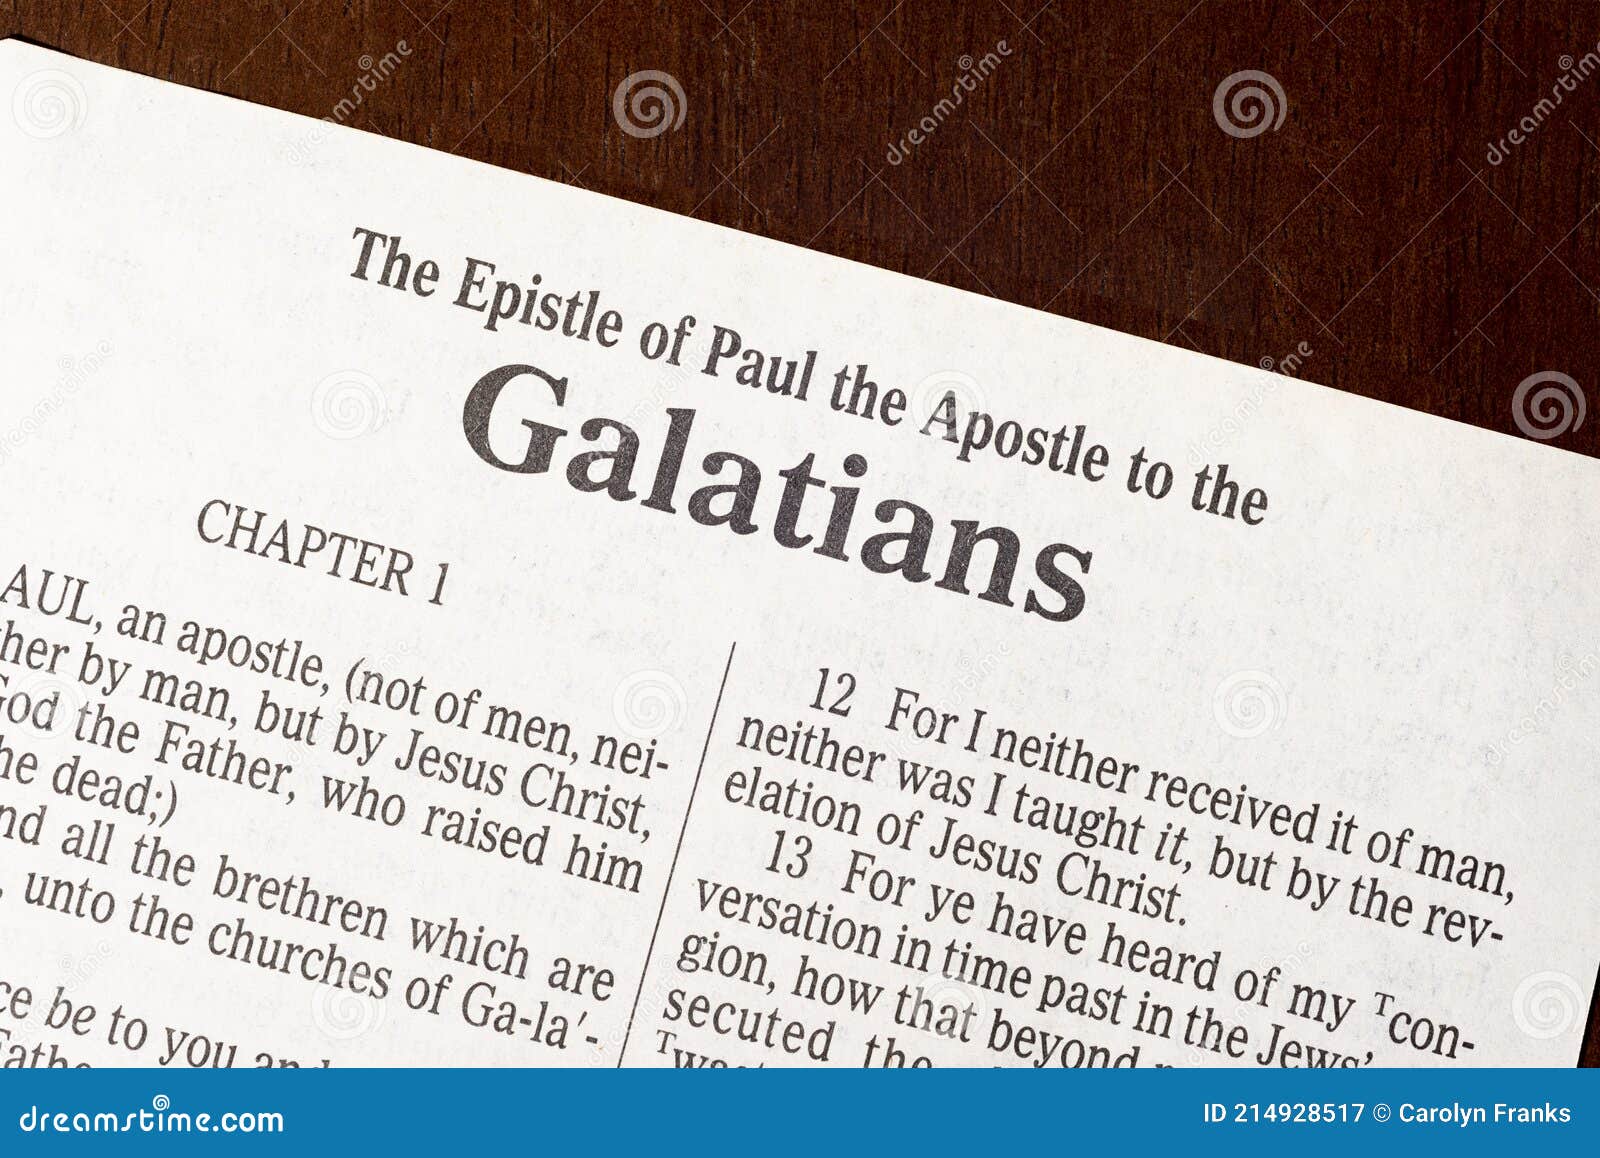 the book of galatians title page close-up